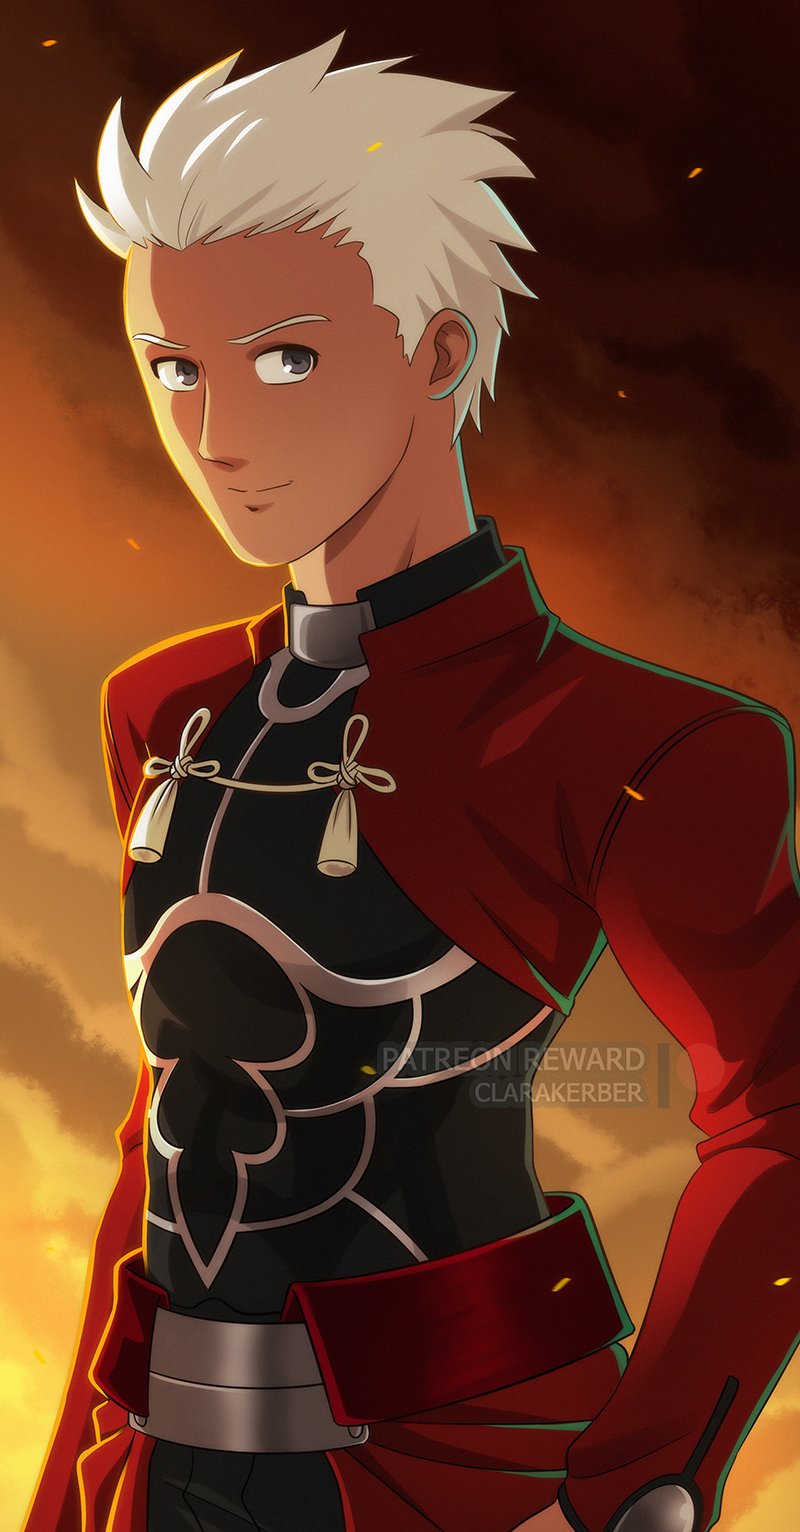 Gazkerber Archer From Fate Stay Night Requested By My Patrons On Patreon He S Ready For Battle フェイトステイナイト Fanart Game Anime T Co Nof7mh6rrb Twitter